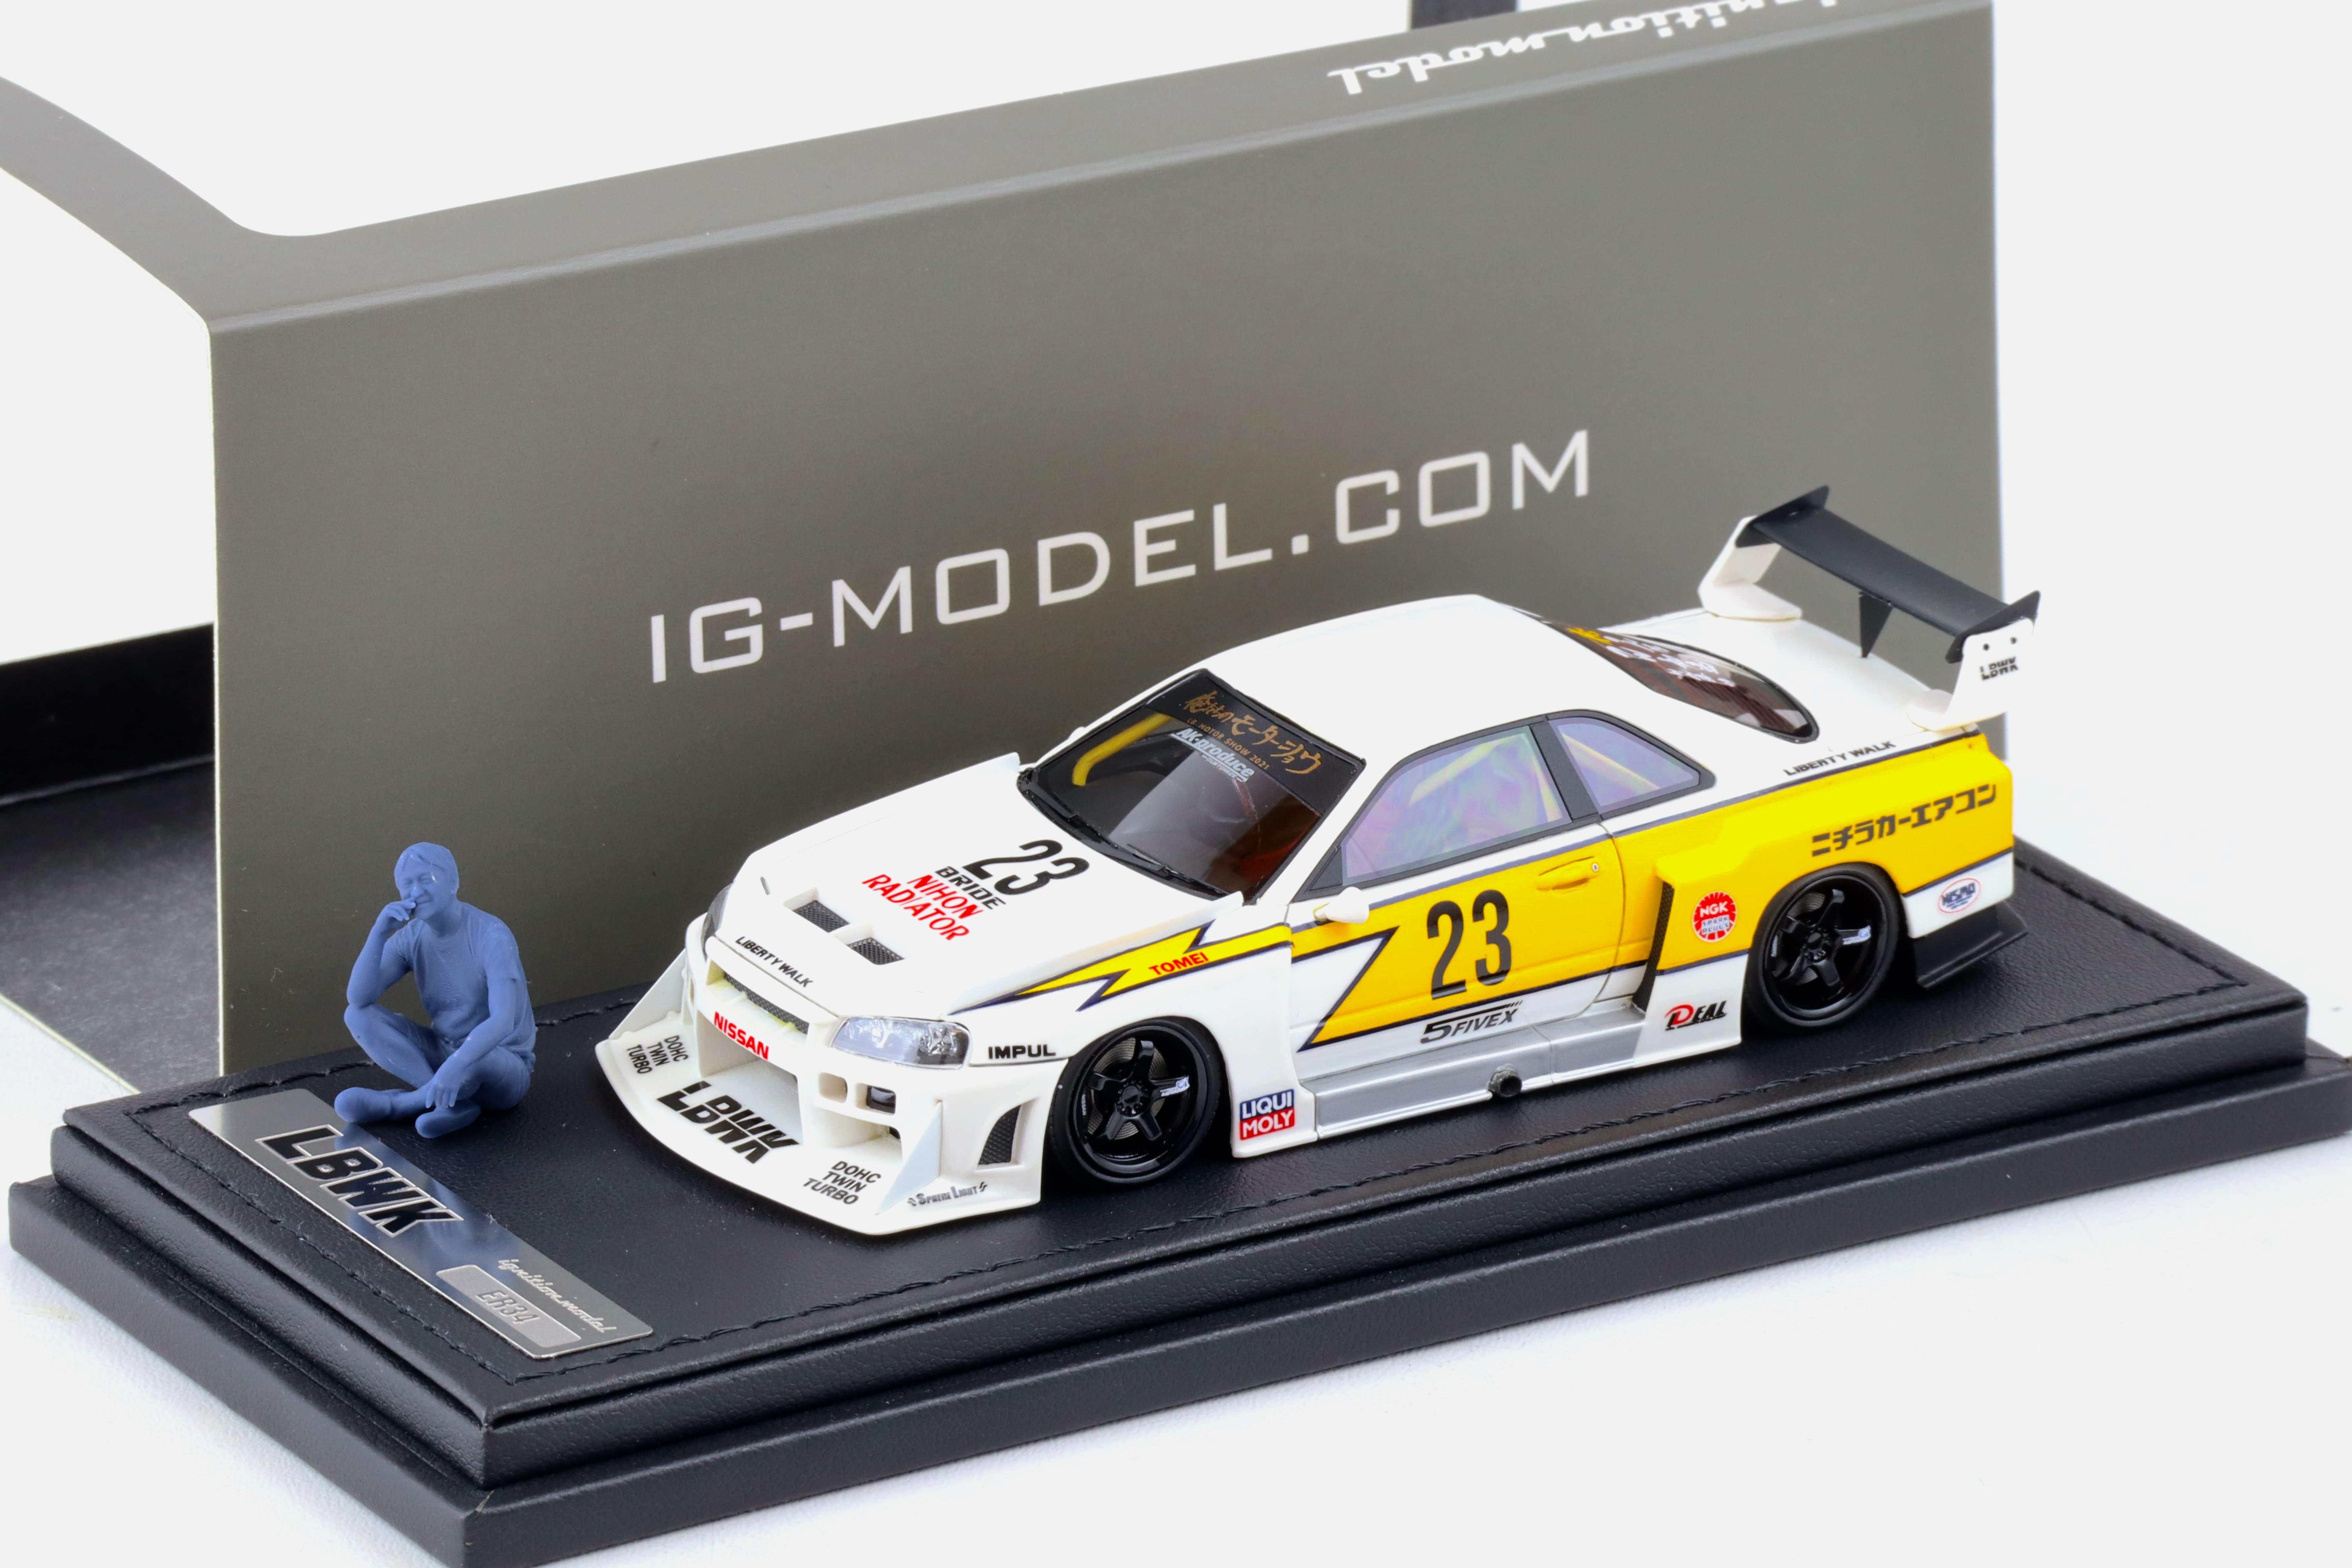 1:43 Ignition Model IG2851 Nissan LB ER34 Super Silhouette Skyline white/ yellow with Mr. Kato